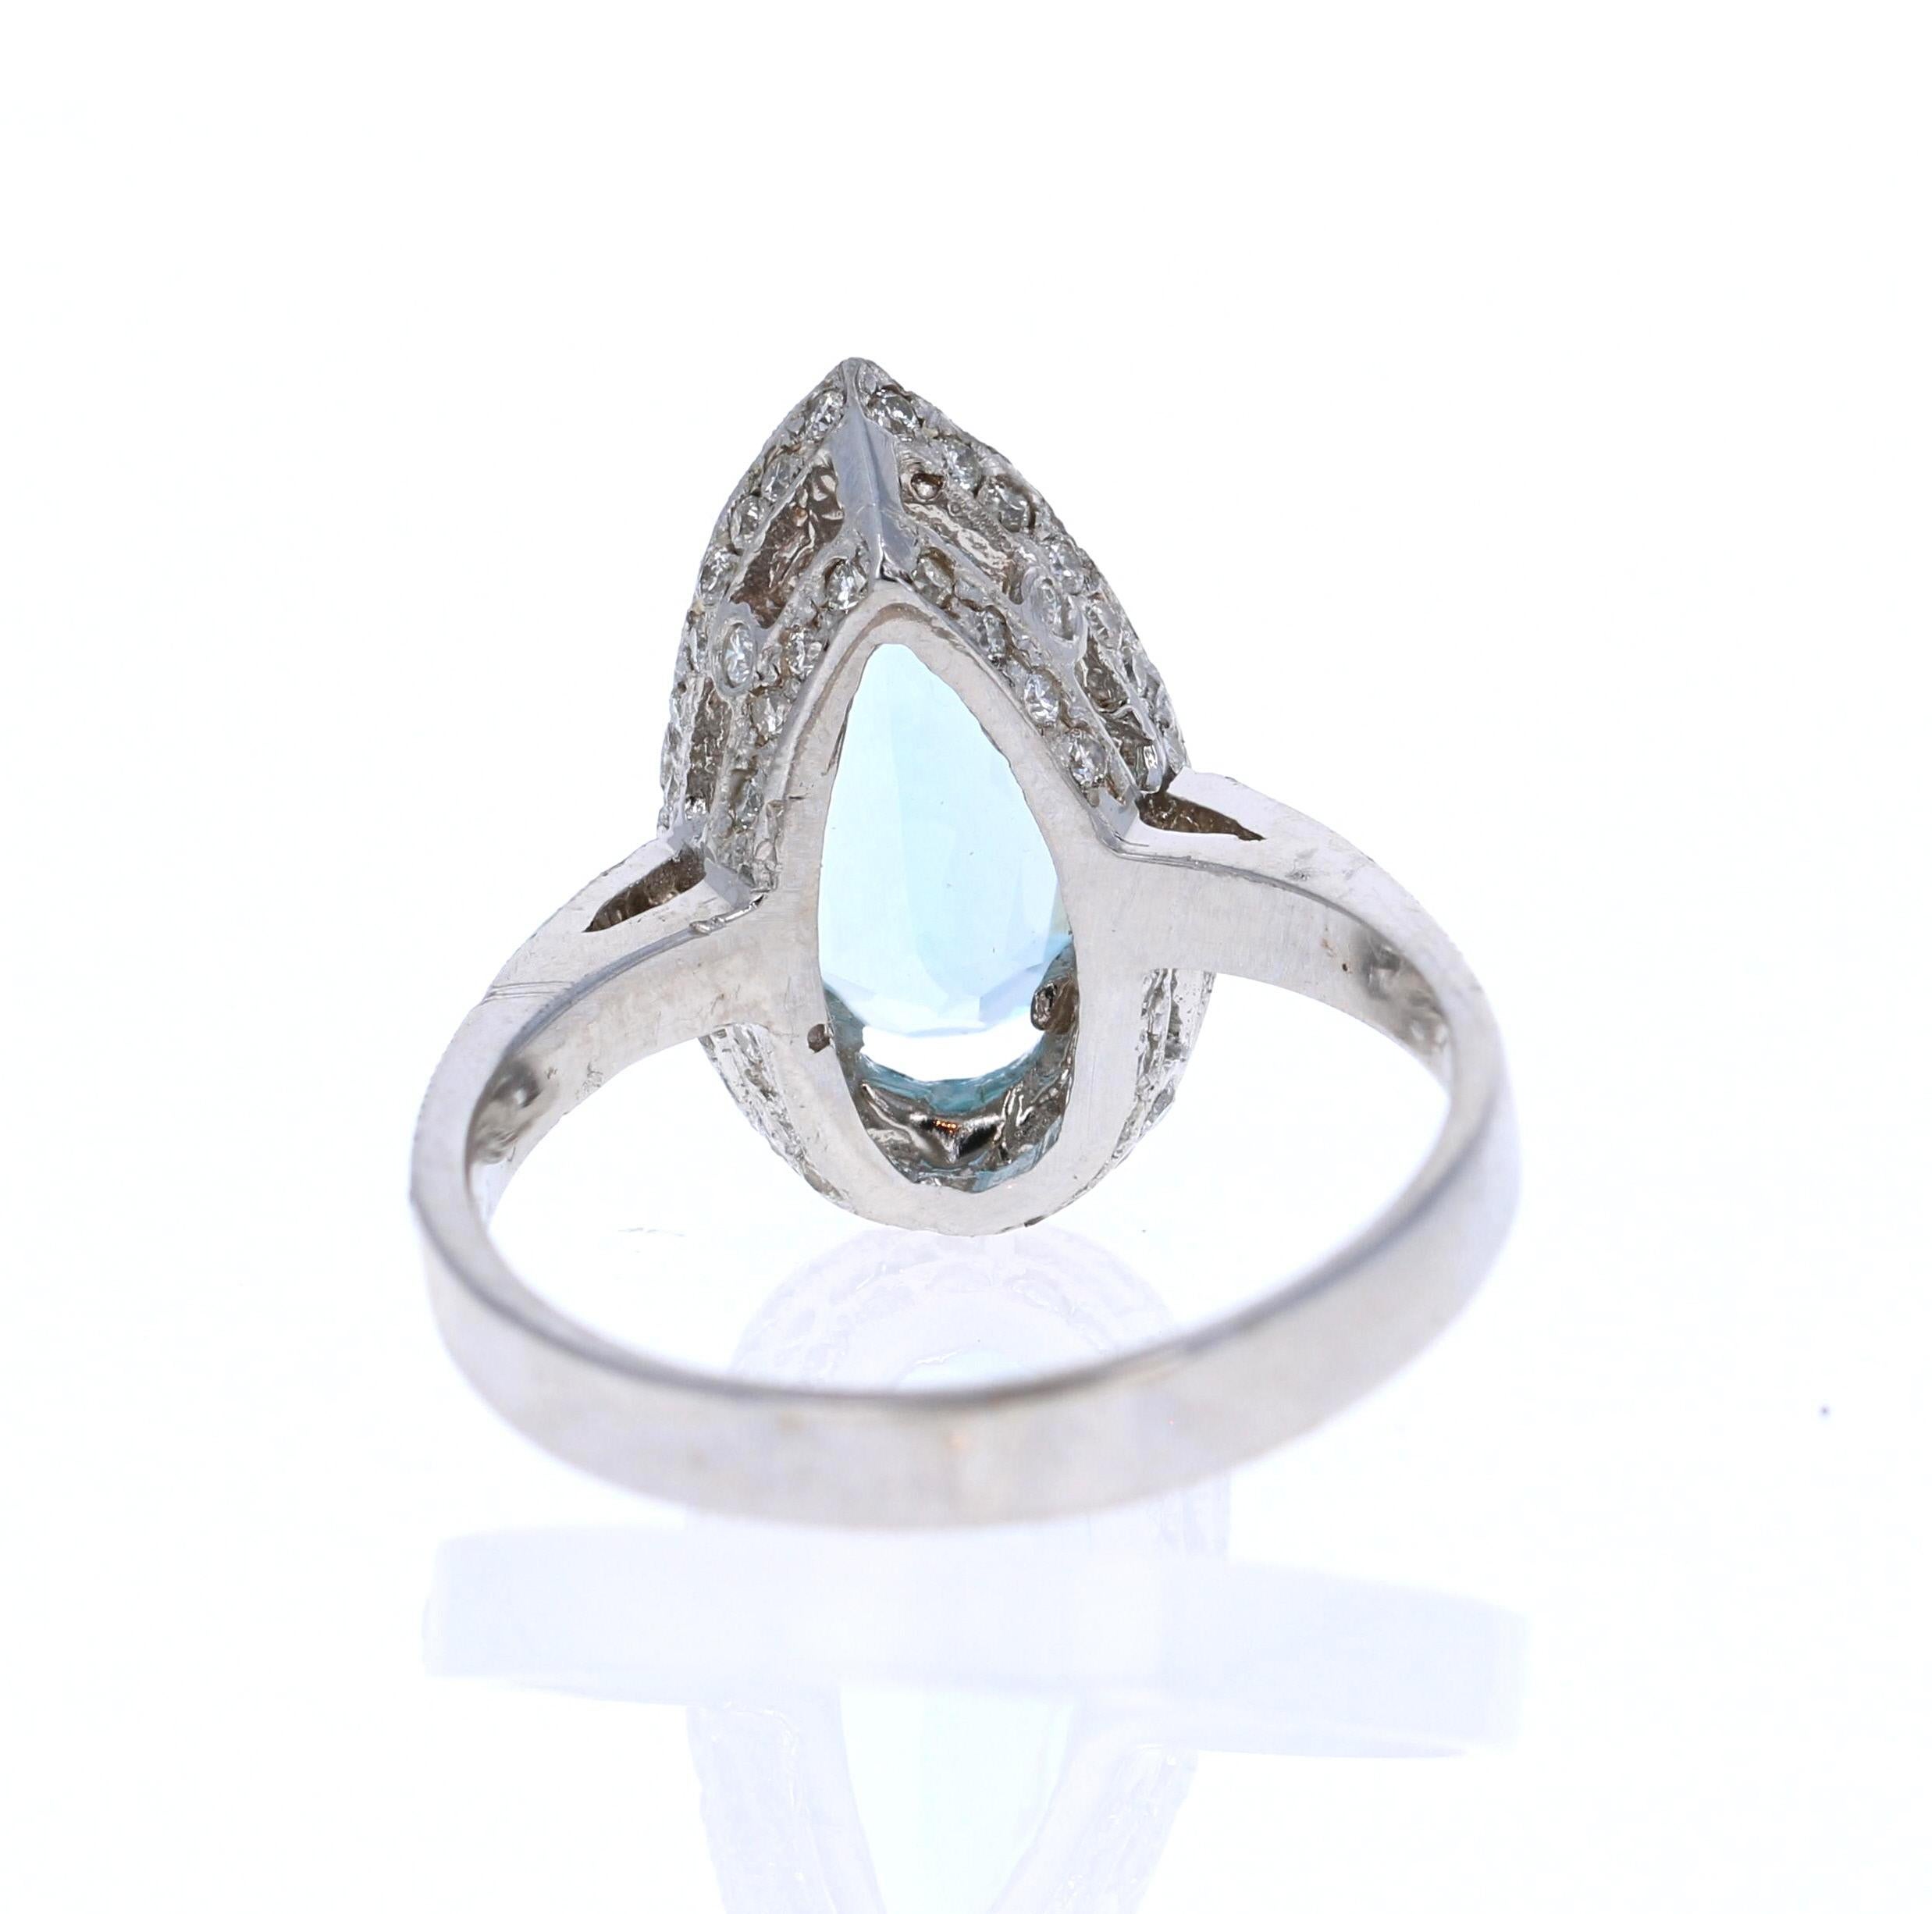 2.95 Carat Aquamarine Diamond White Gold Cocktail Ring In New Condition For Sale In Los Angeles, CA